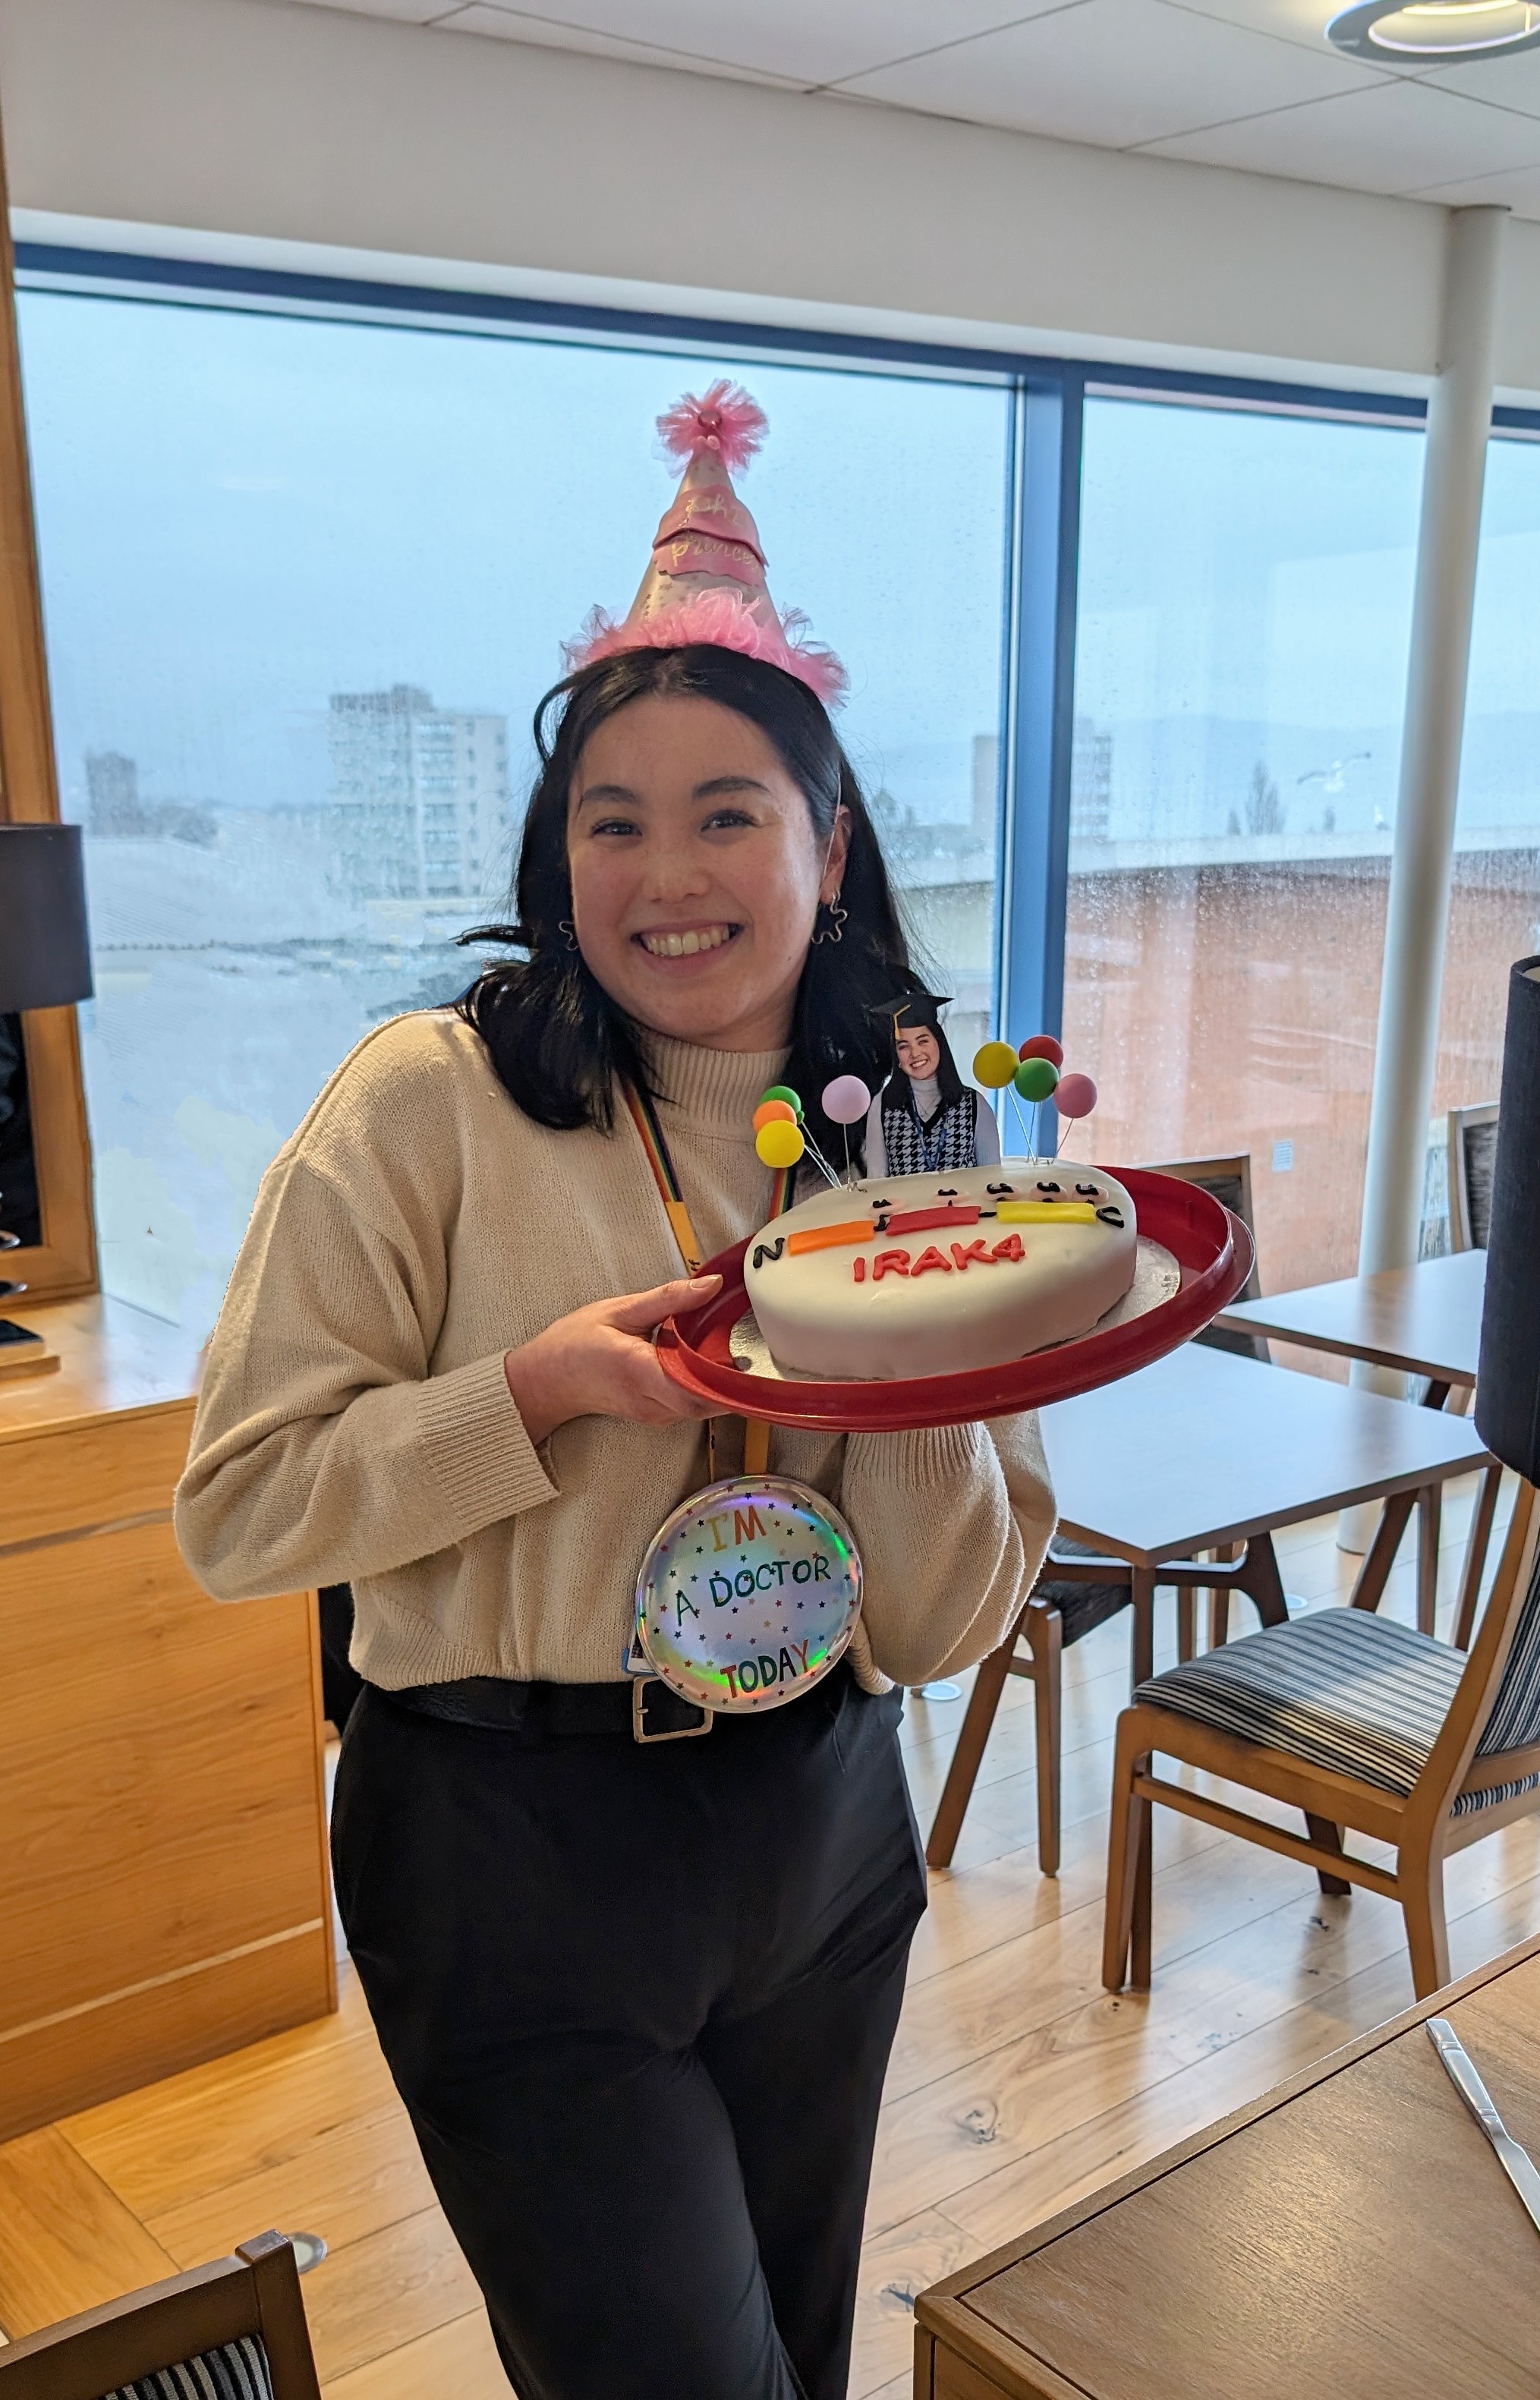 Elisha at the reception after the Viva holding her celebration cake cooked by tsvetana Petrova, a postdoctoral researcher in Philip Cohen’s lab